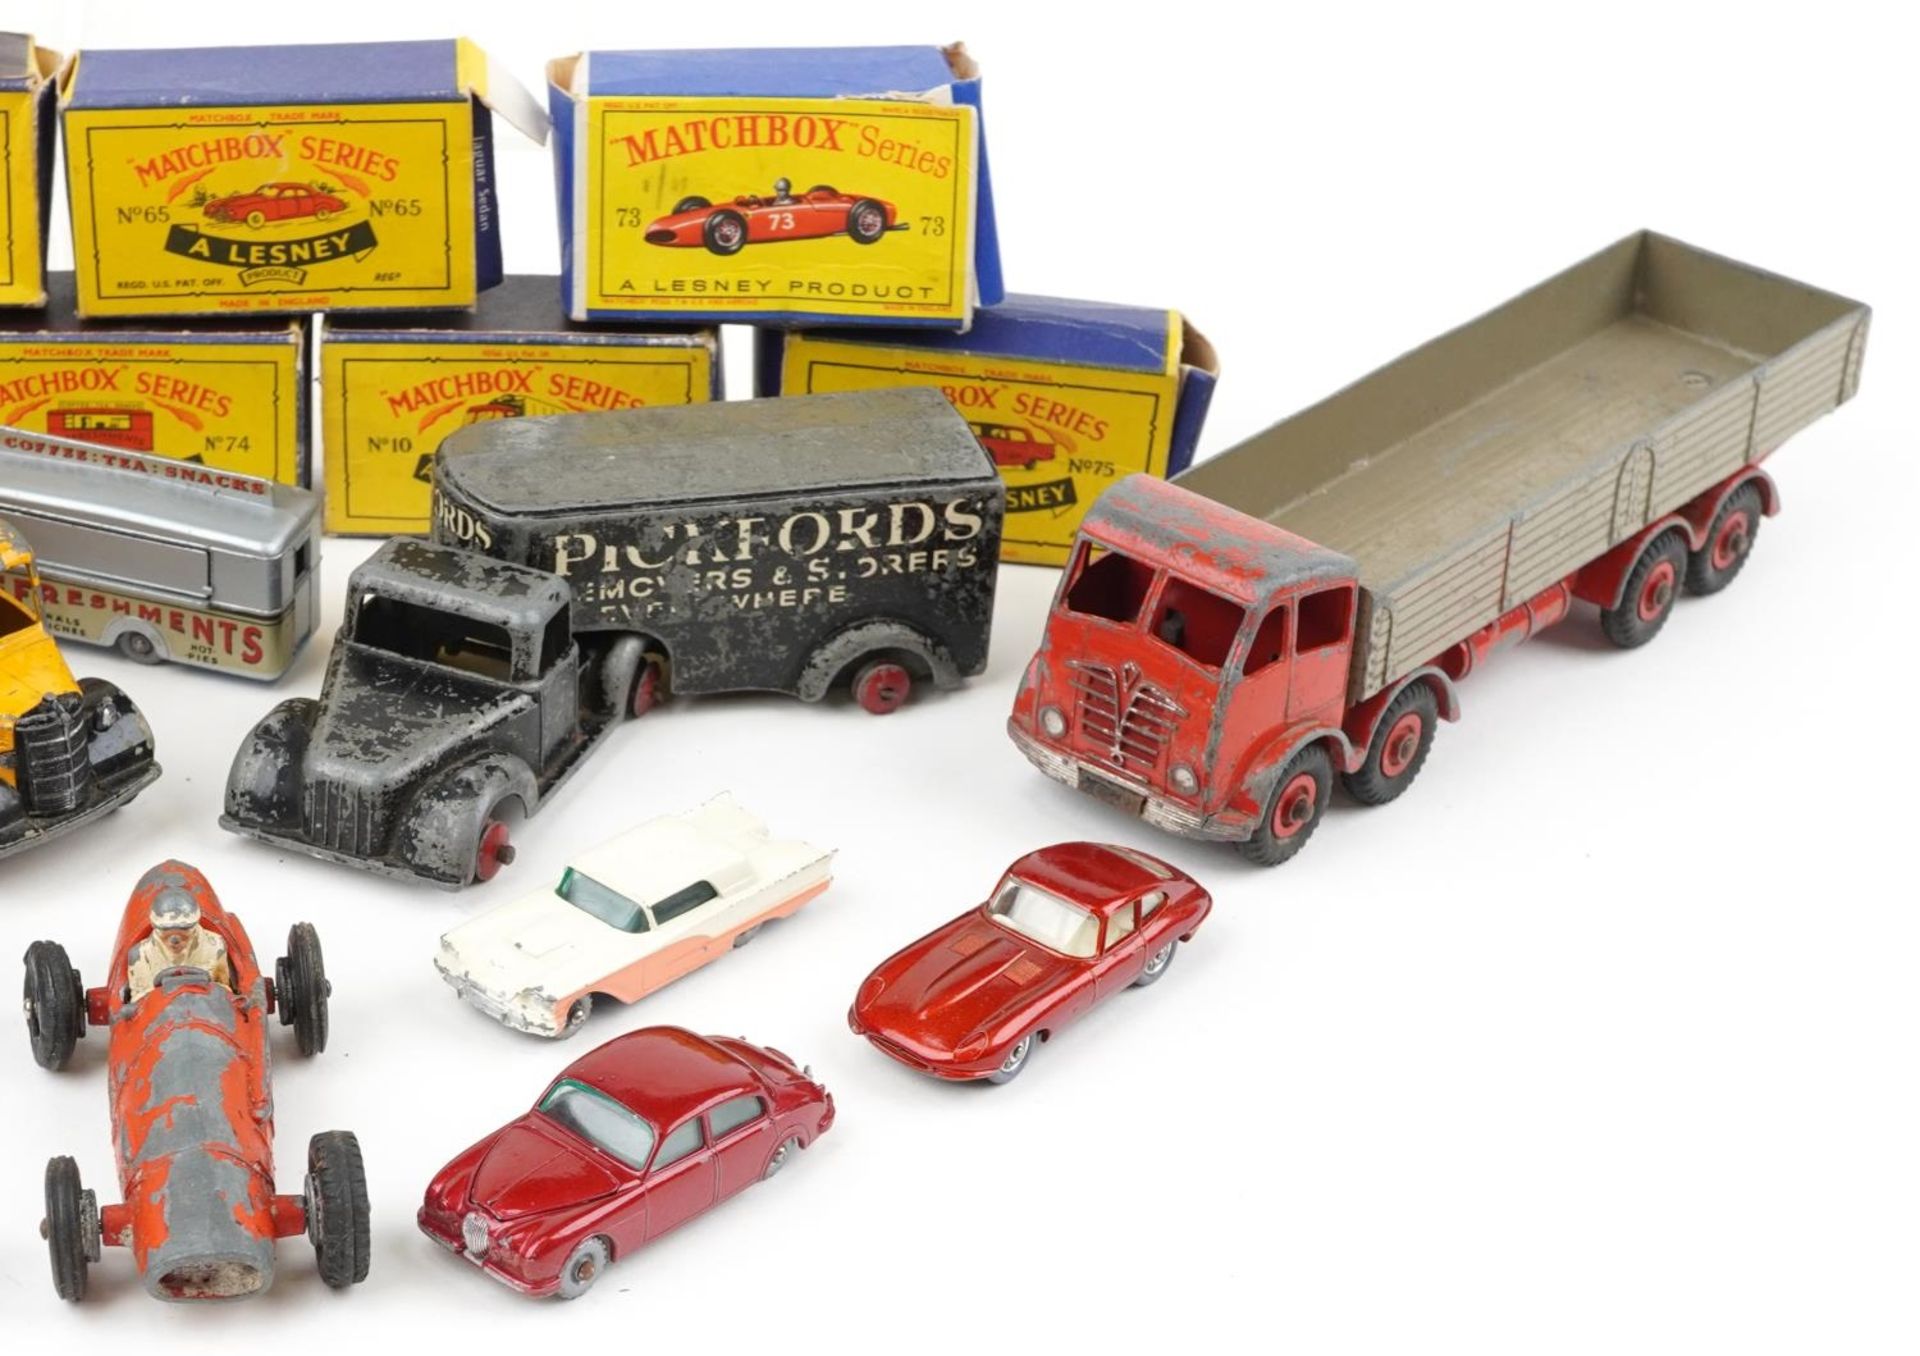 Vintage diecast vehicles, some with boxes, including Matchbox Series, Timpo Toys, Dinky Supertoys - Image 3 of 3